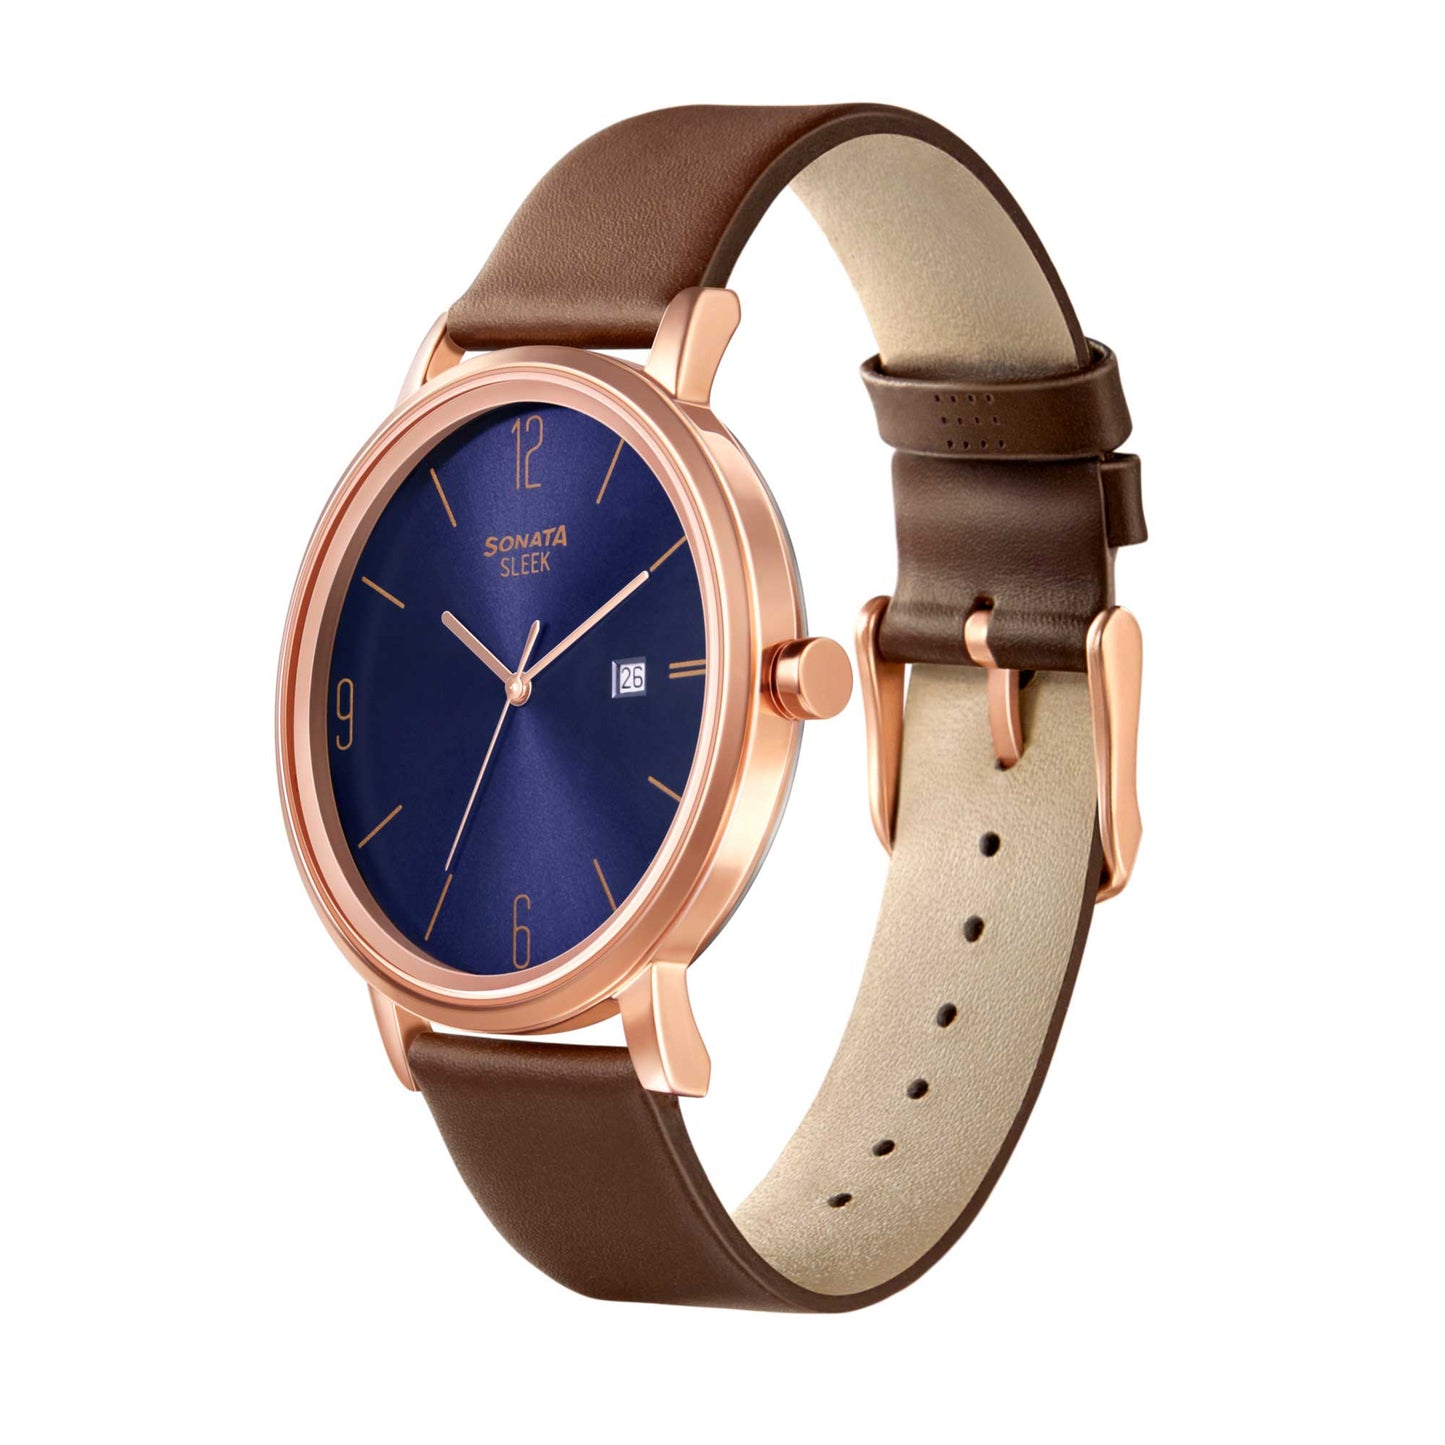 Sonata Quartz Analog with Date Blue Dial Leather Strap Watch for Men